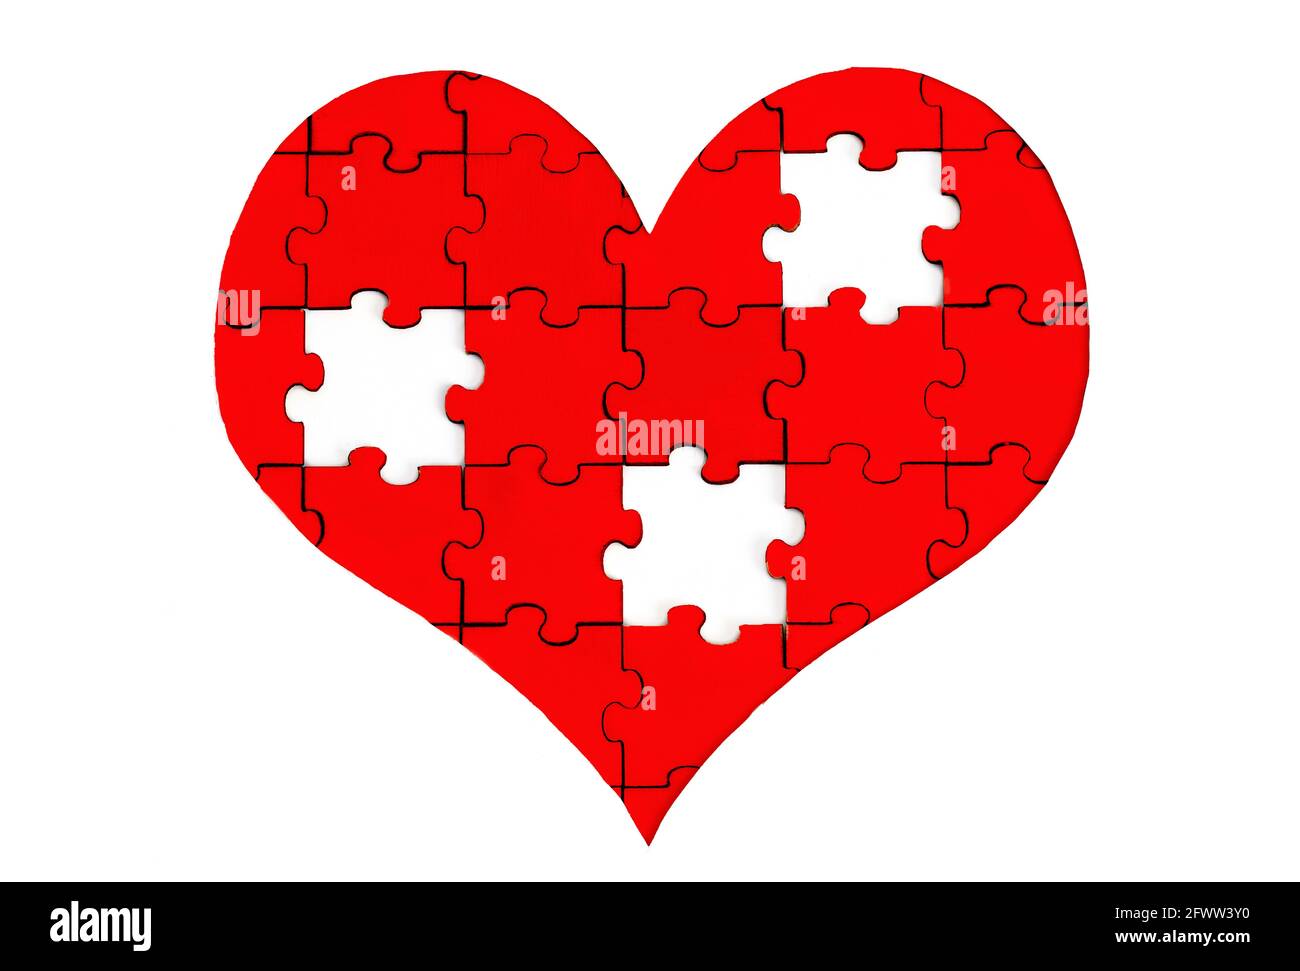 Red heart shaped jigsaw puzzle with three missing pieces isolated on white Stock Photo